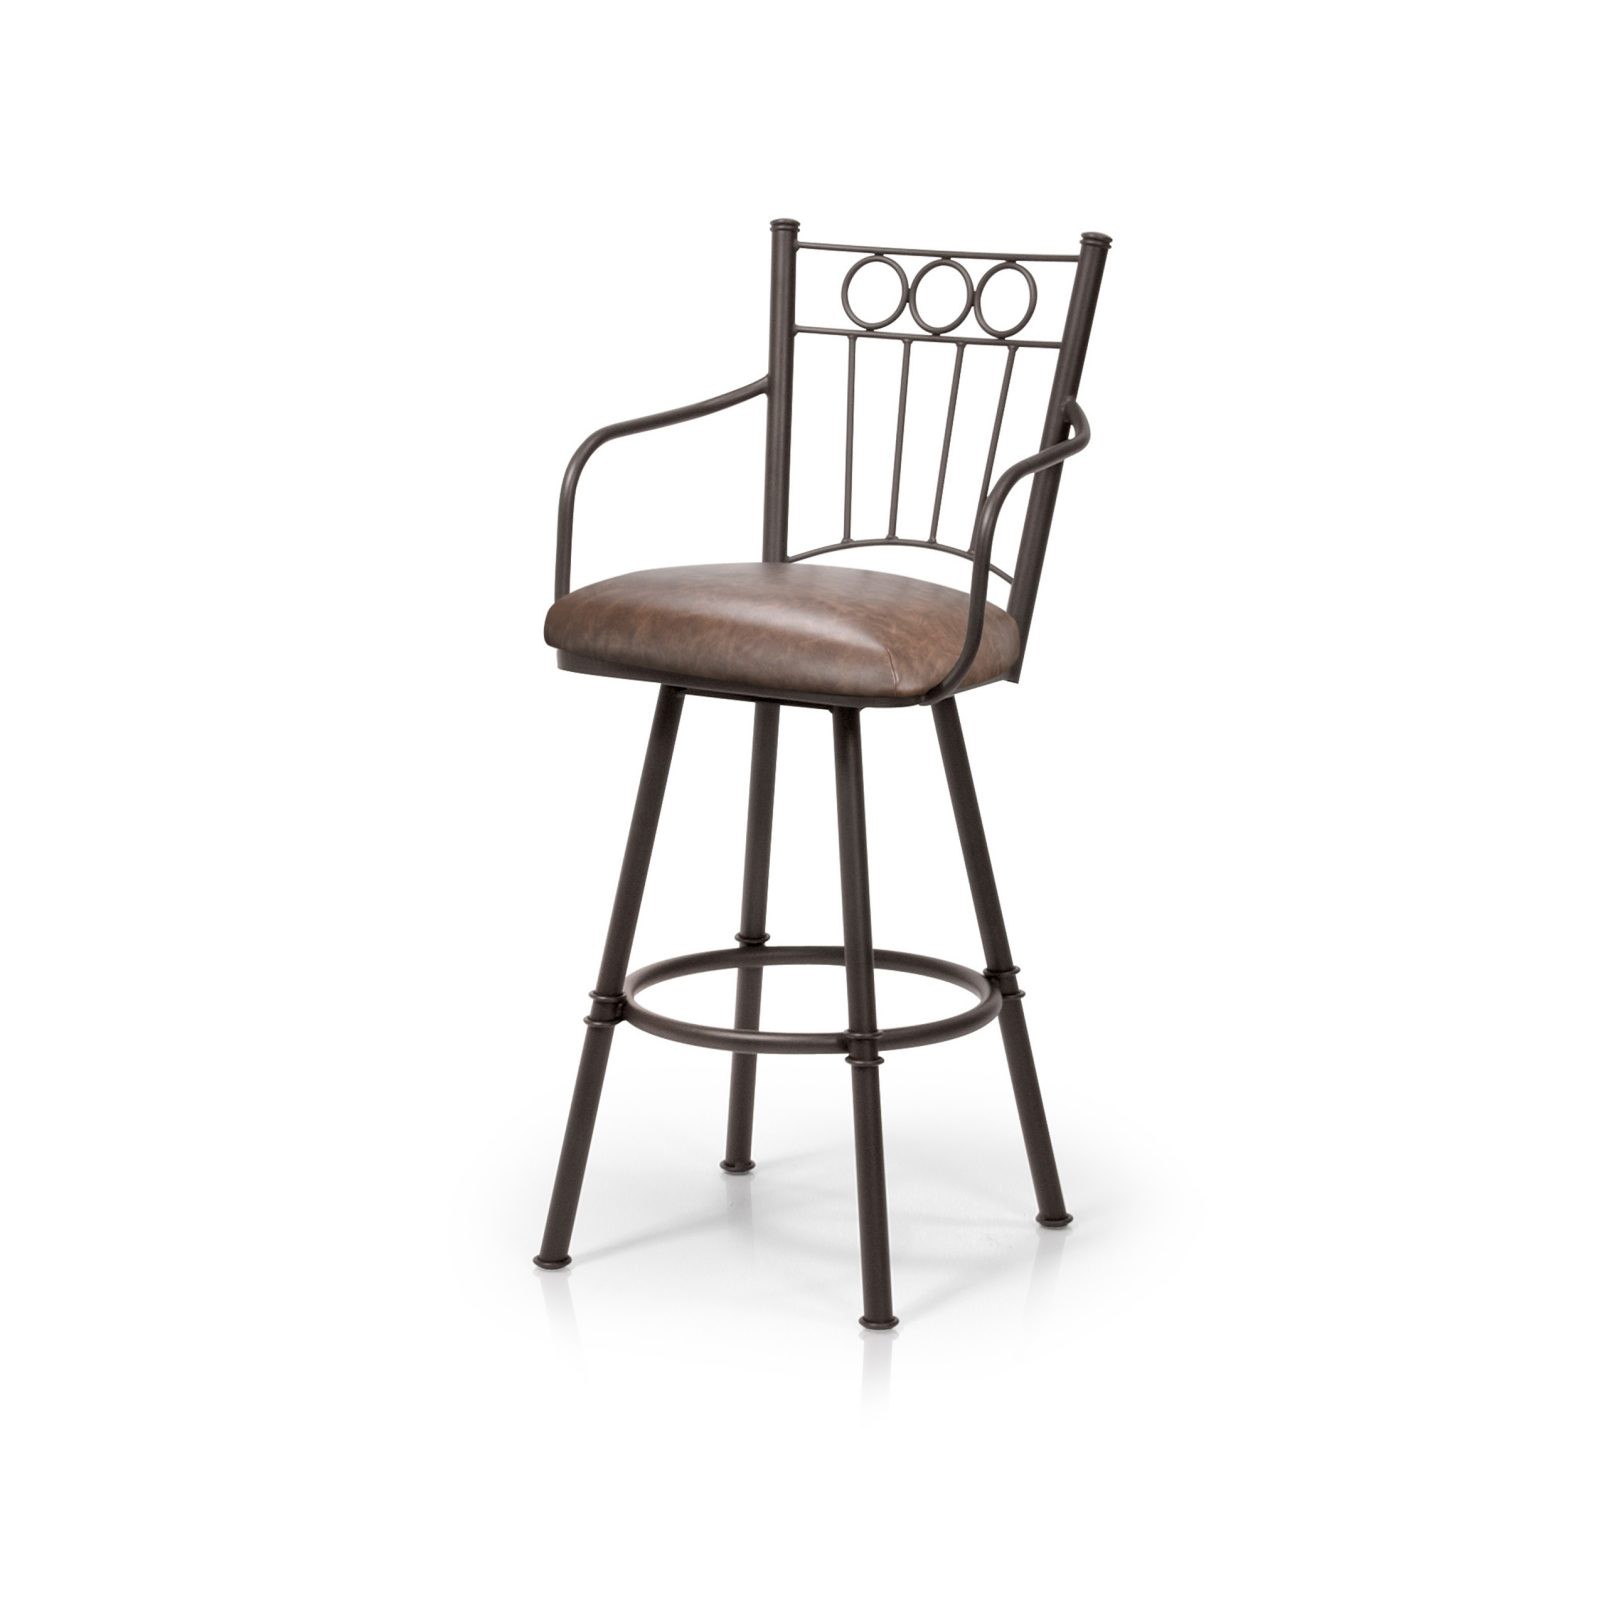 Charles II Bar Stool • Metal - Chocolate  Vinyl - Crazy Horse - Shown With Comfort Seat